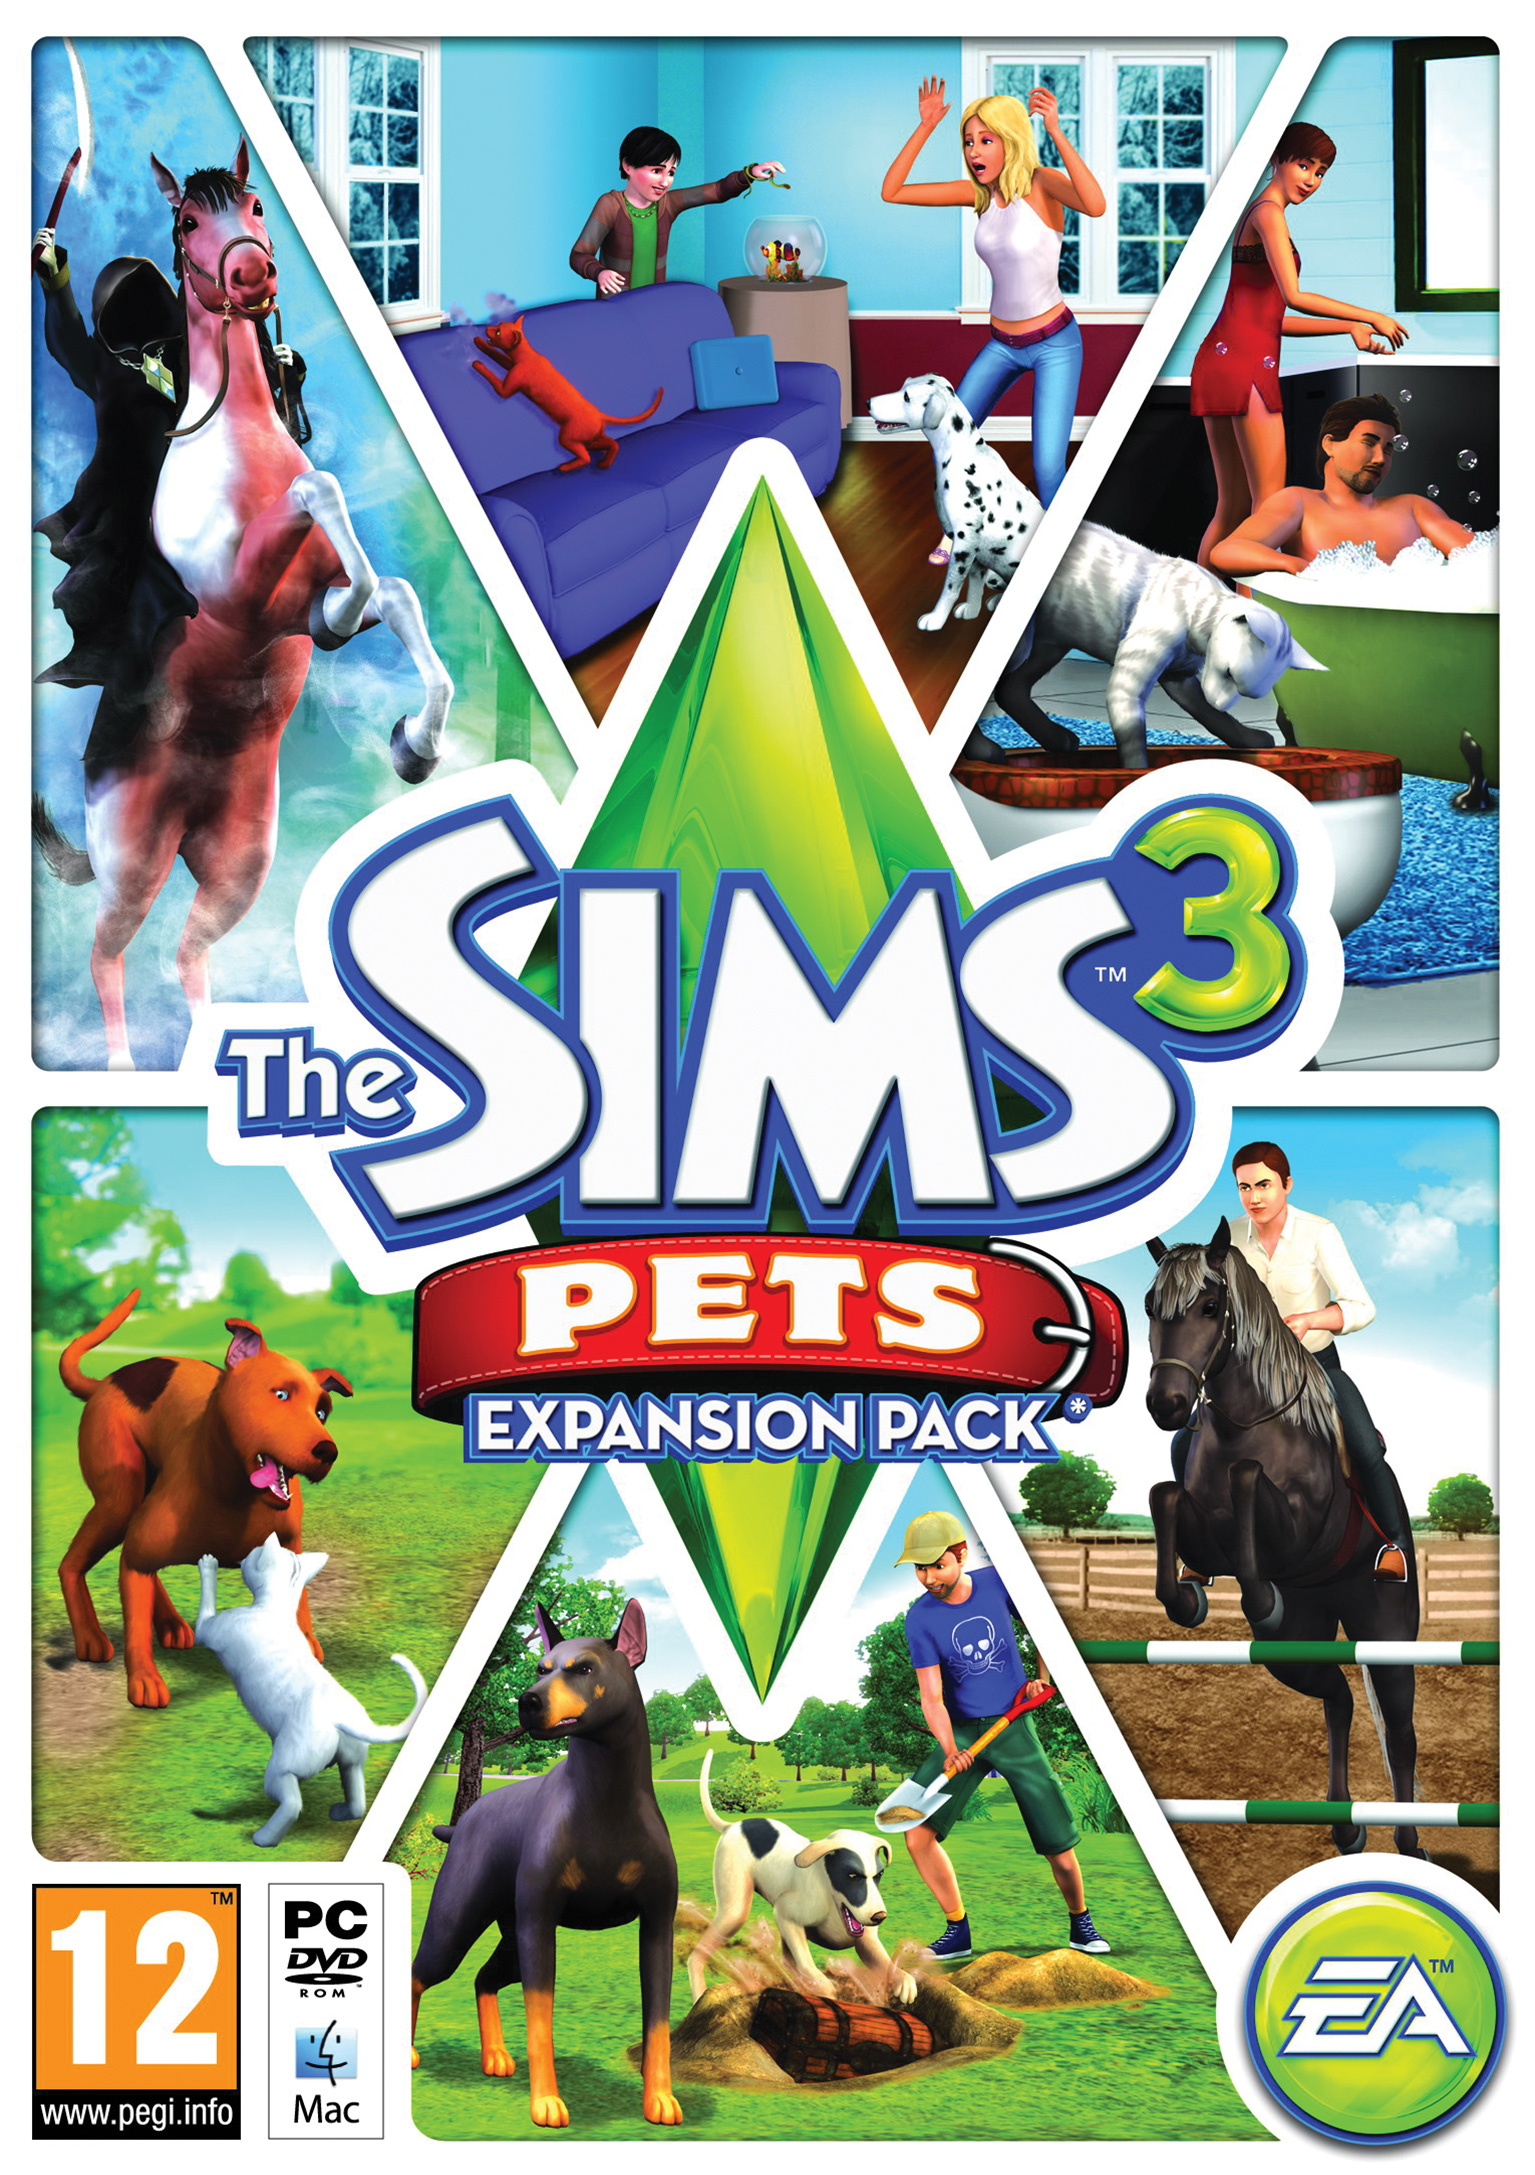 The Sims 3: Pets - predn DVD obal